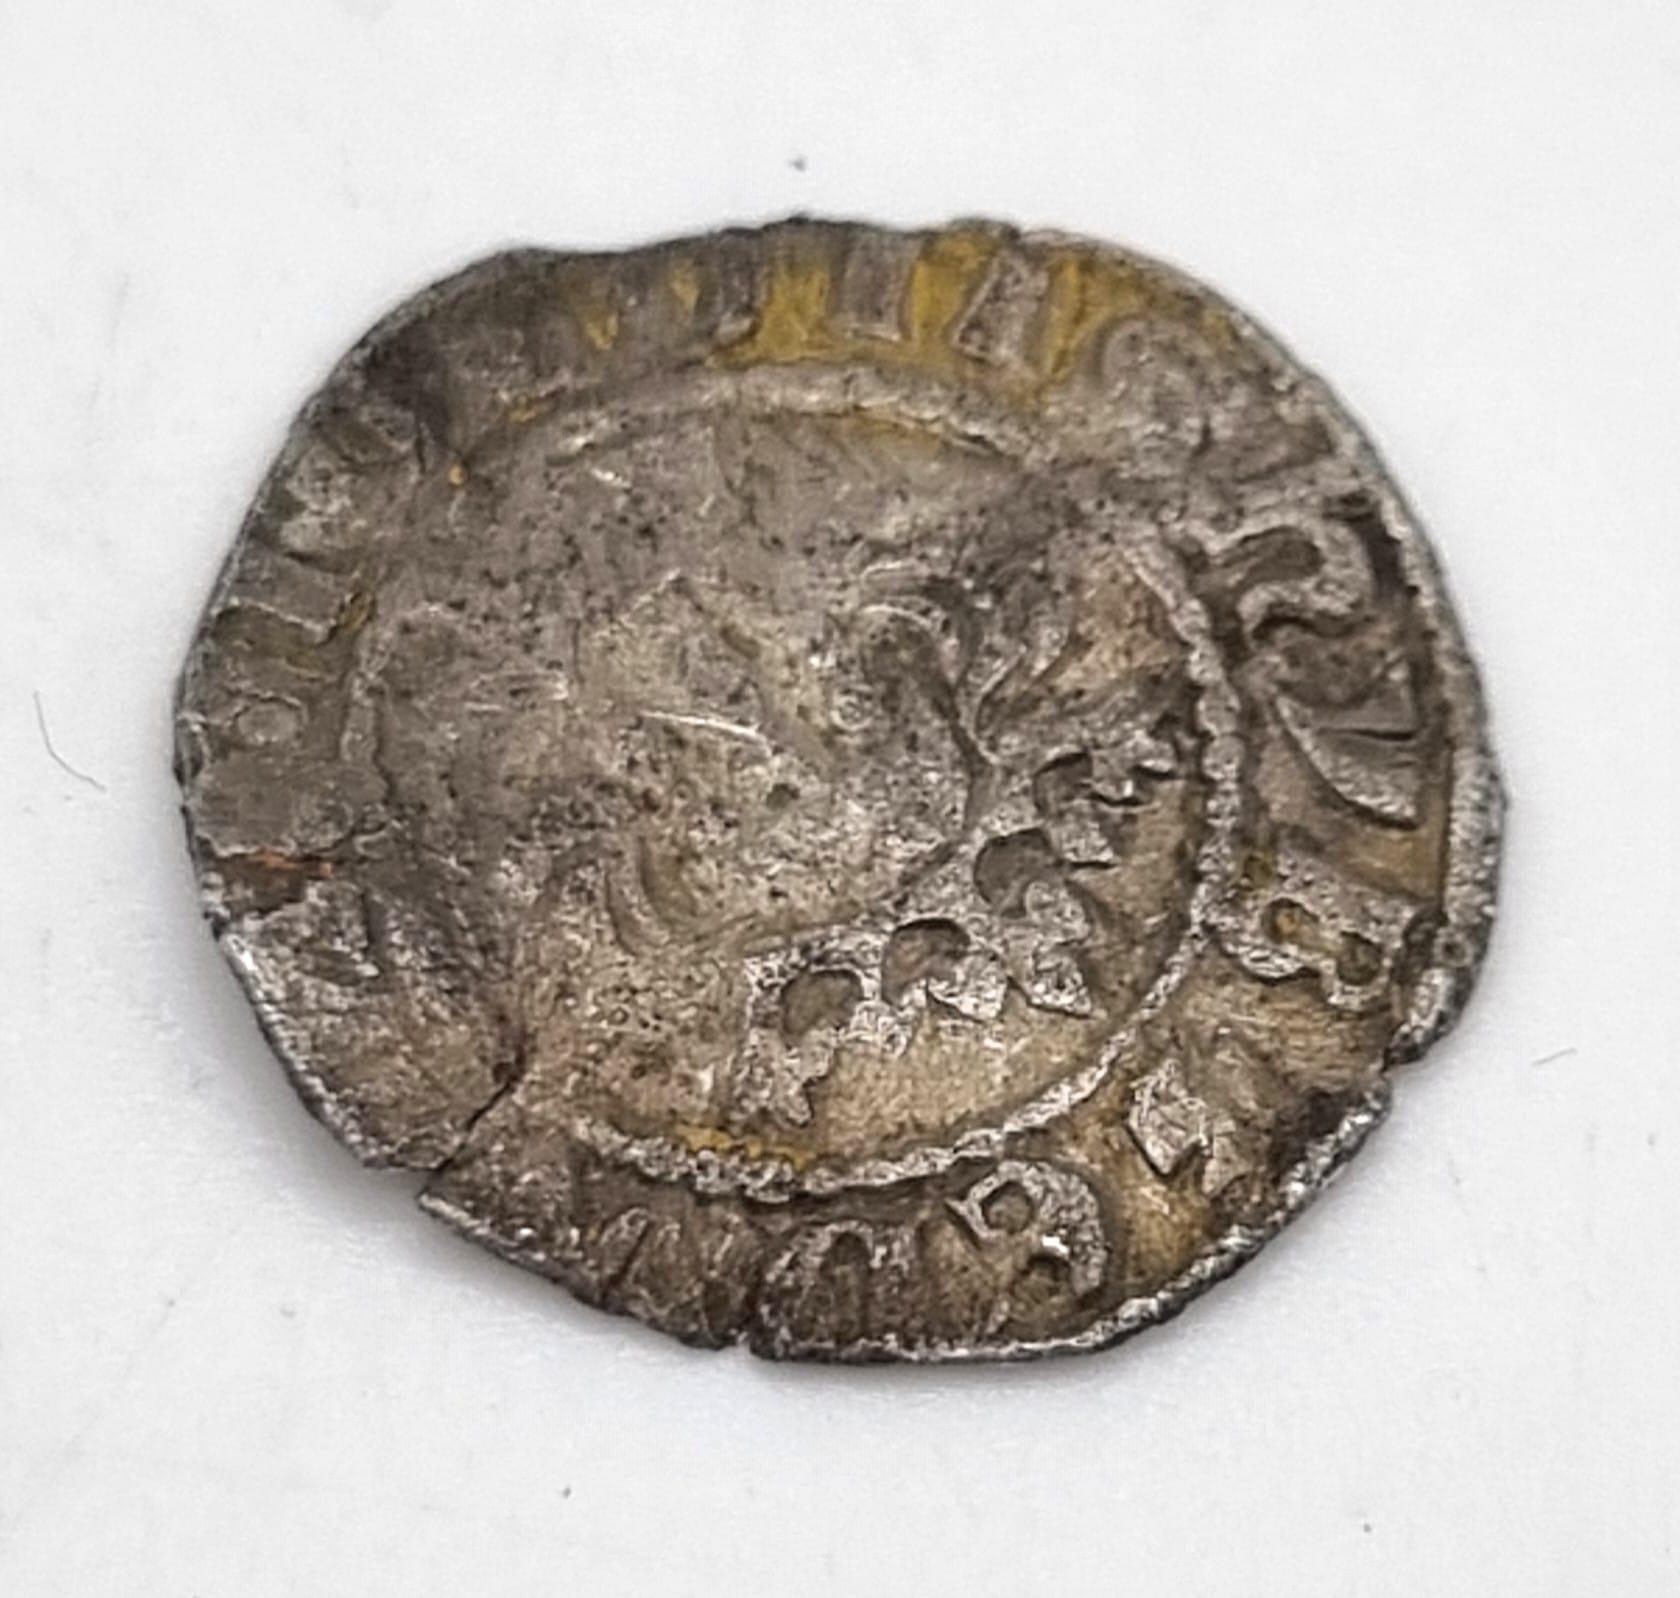 An Edward II Silver Penny, 1455-1463, near fine condition, minted in London. Class 11-15. - Image 2 of 2